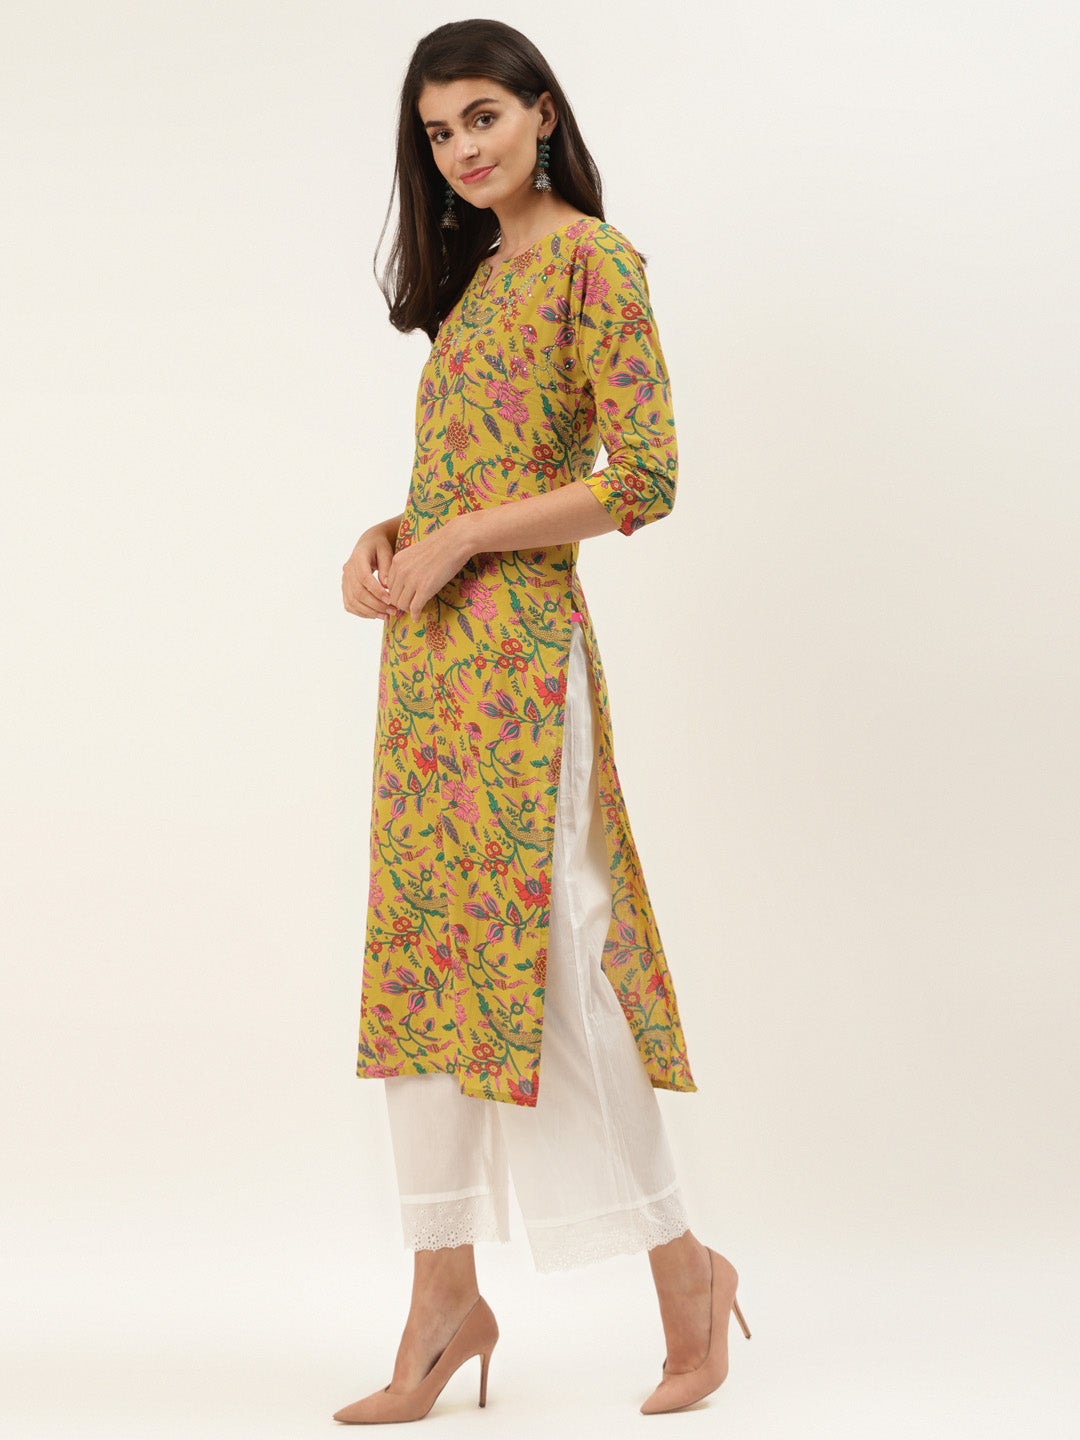 mustard and pink floral printed straight kurta with handwork detailing on yoke.